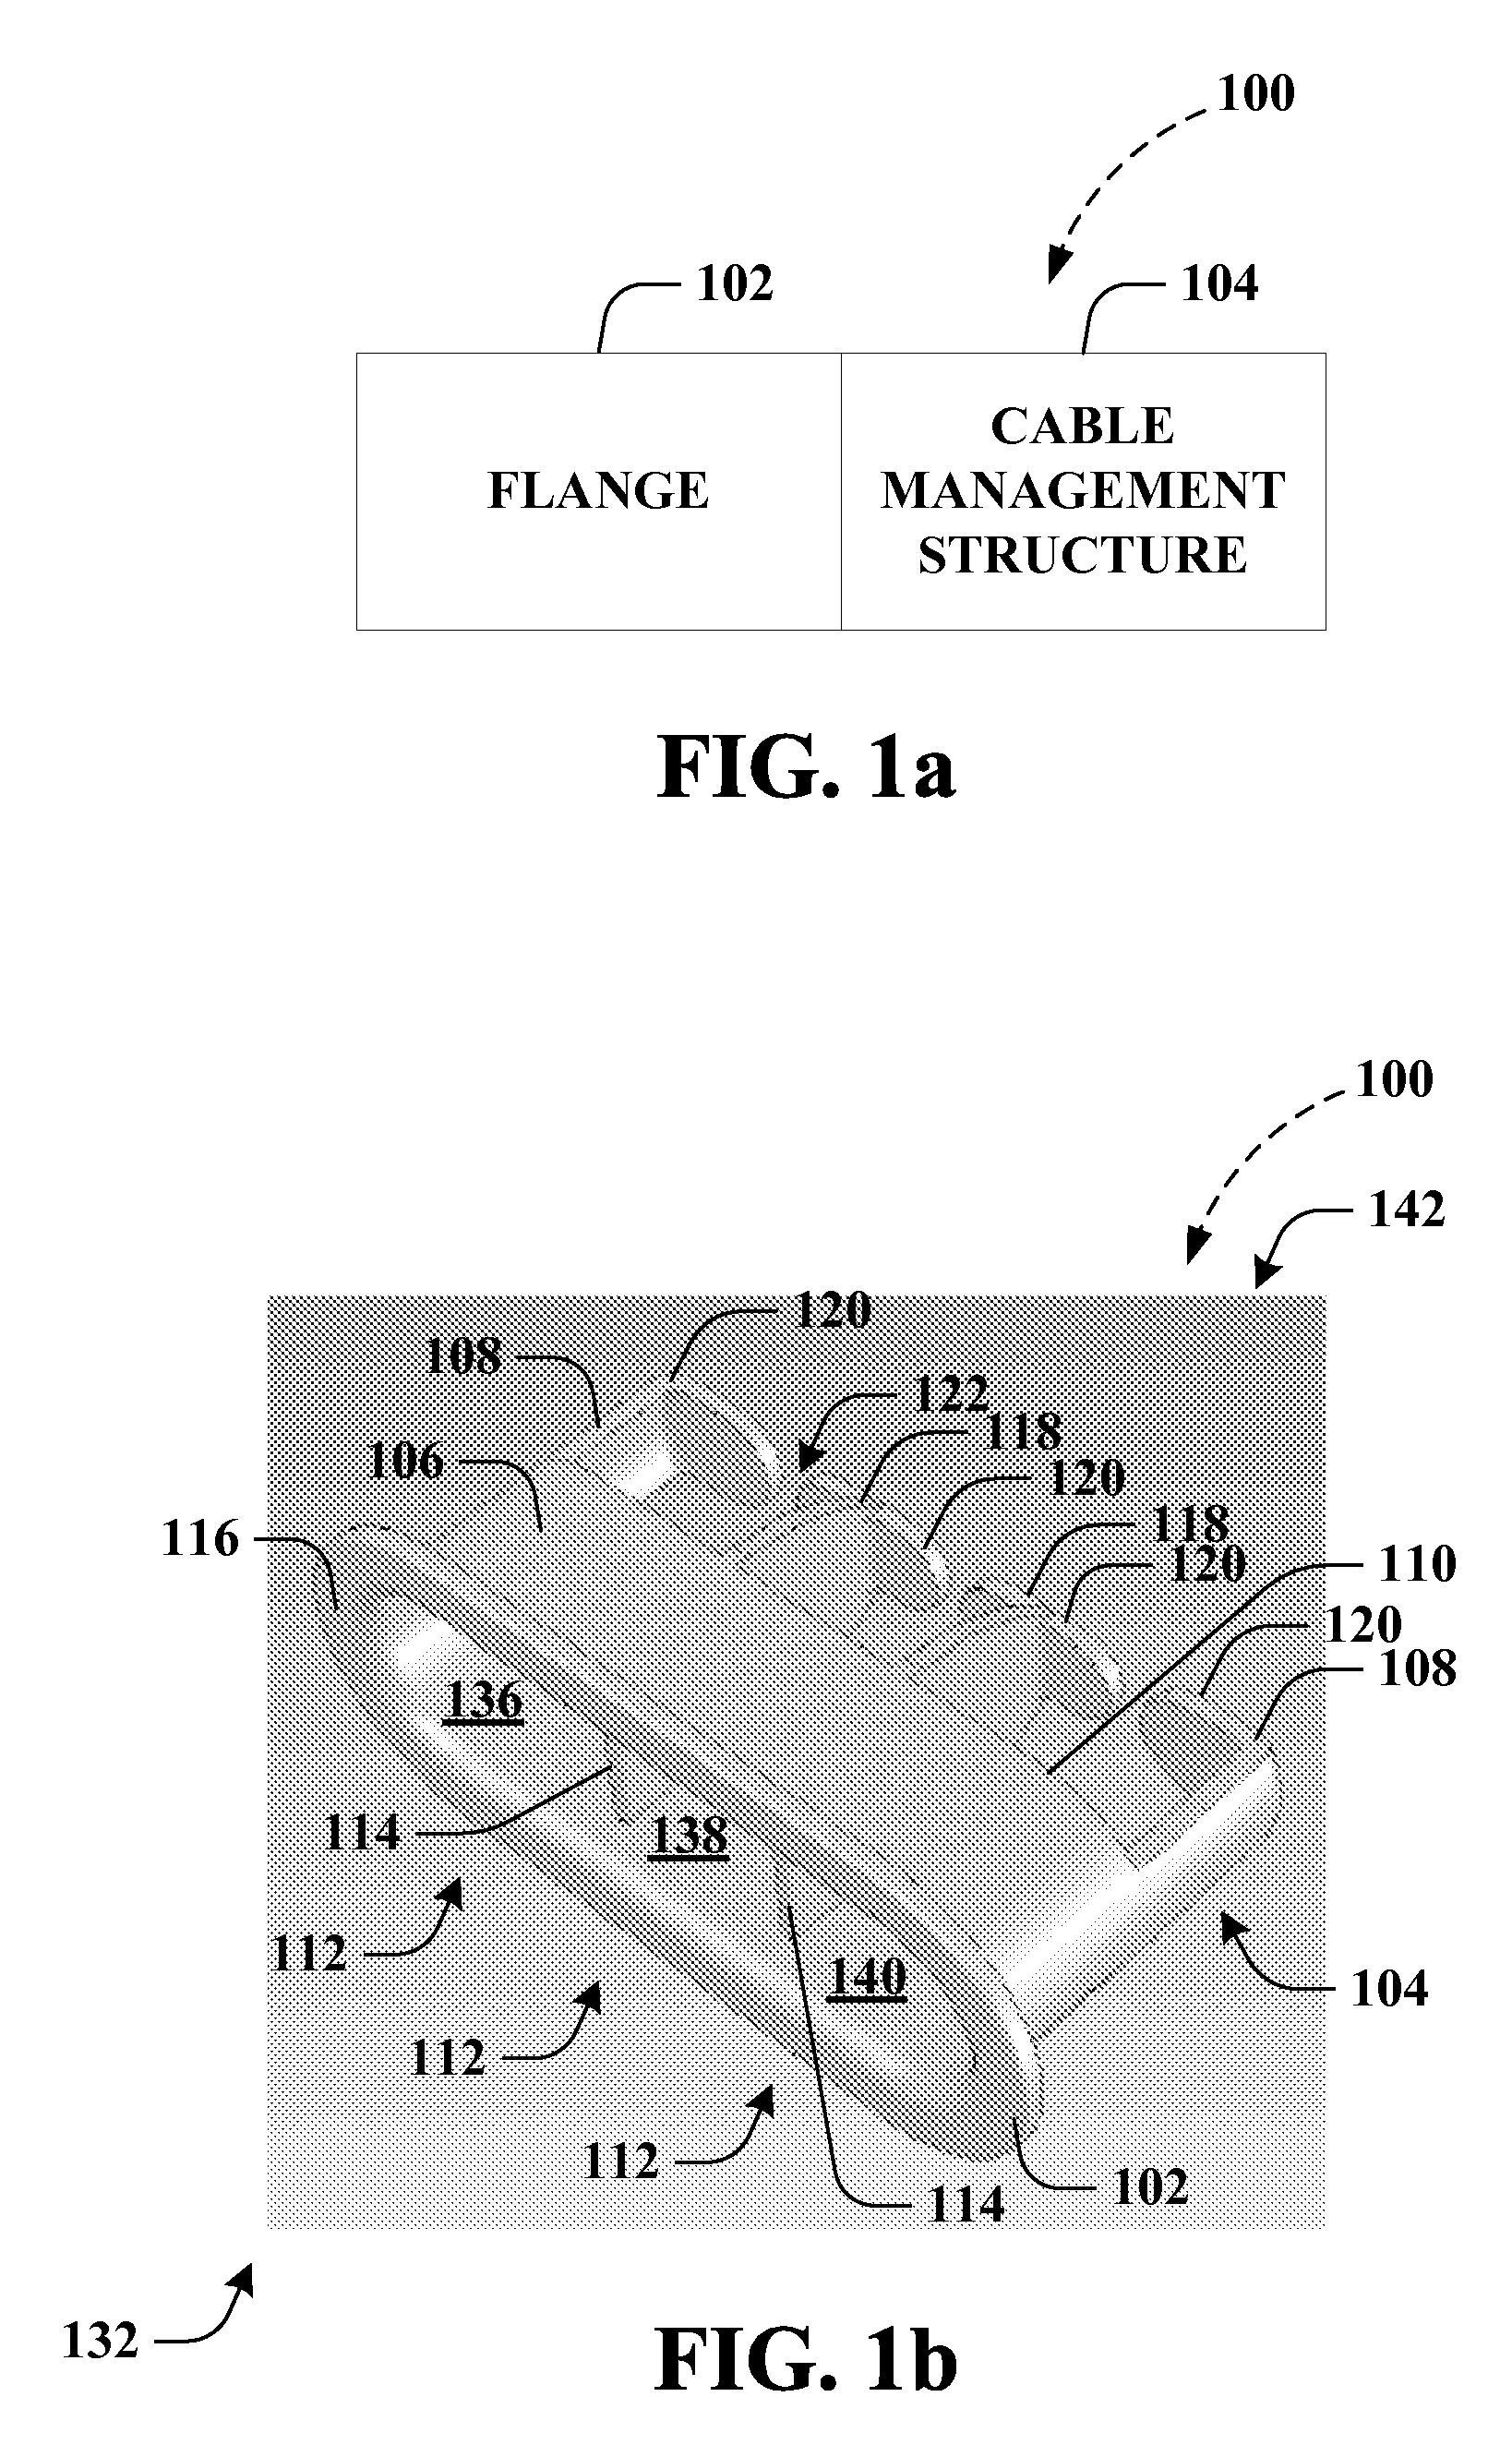 Cable management apparatus, system, and furniture structures